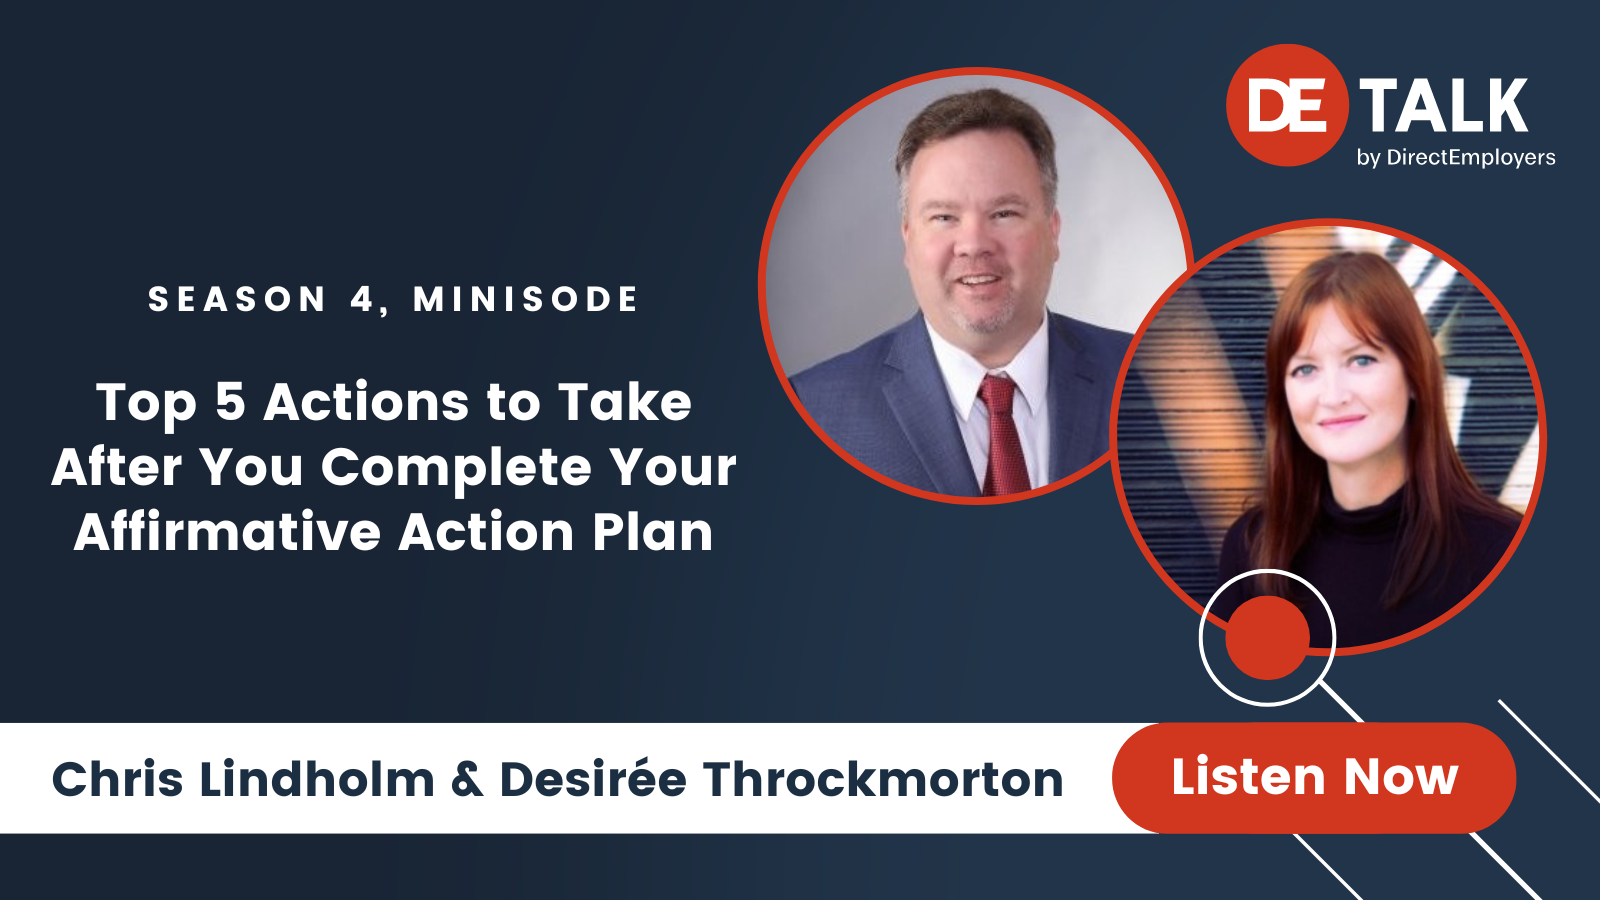 DE Talk Season 4 Minisode | Top 5 Actions to Take After You Complete Your AAP with Chris Lindholm & Desiree Throckmorton